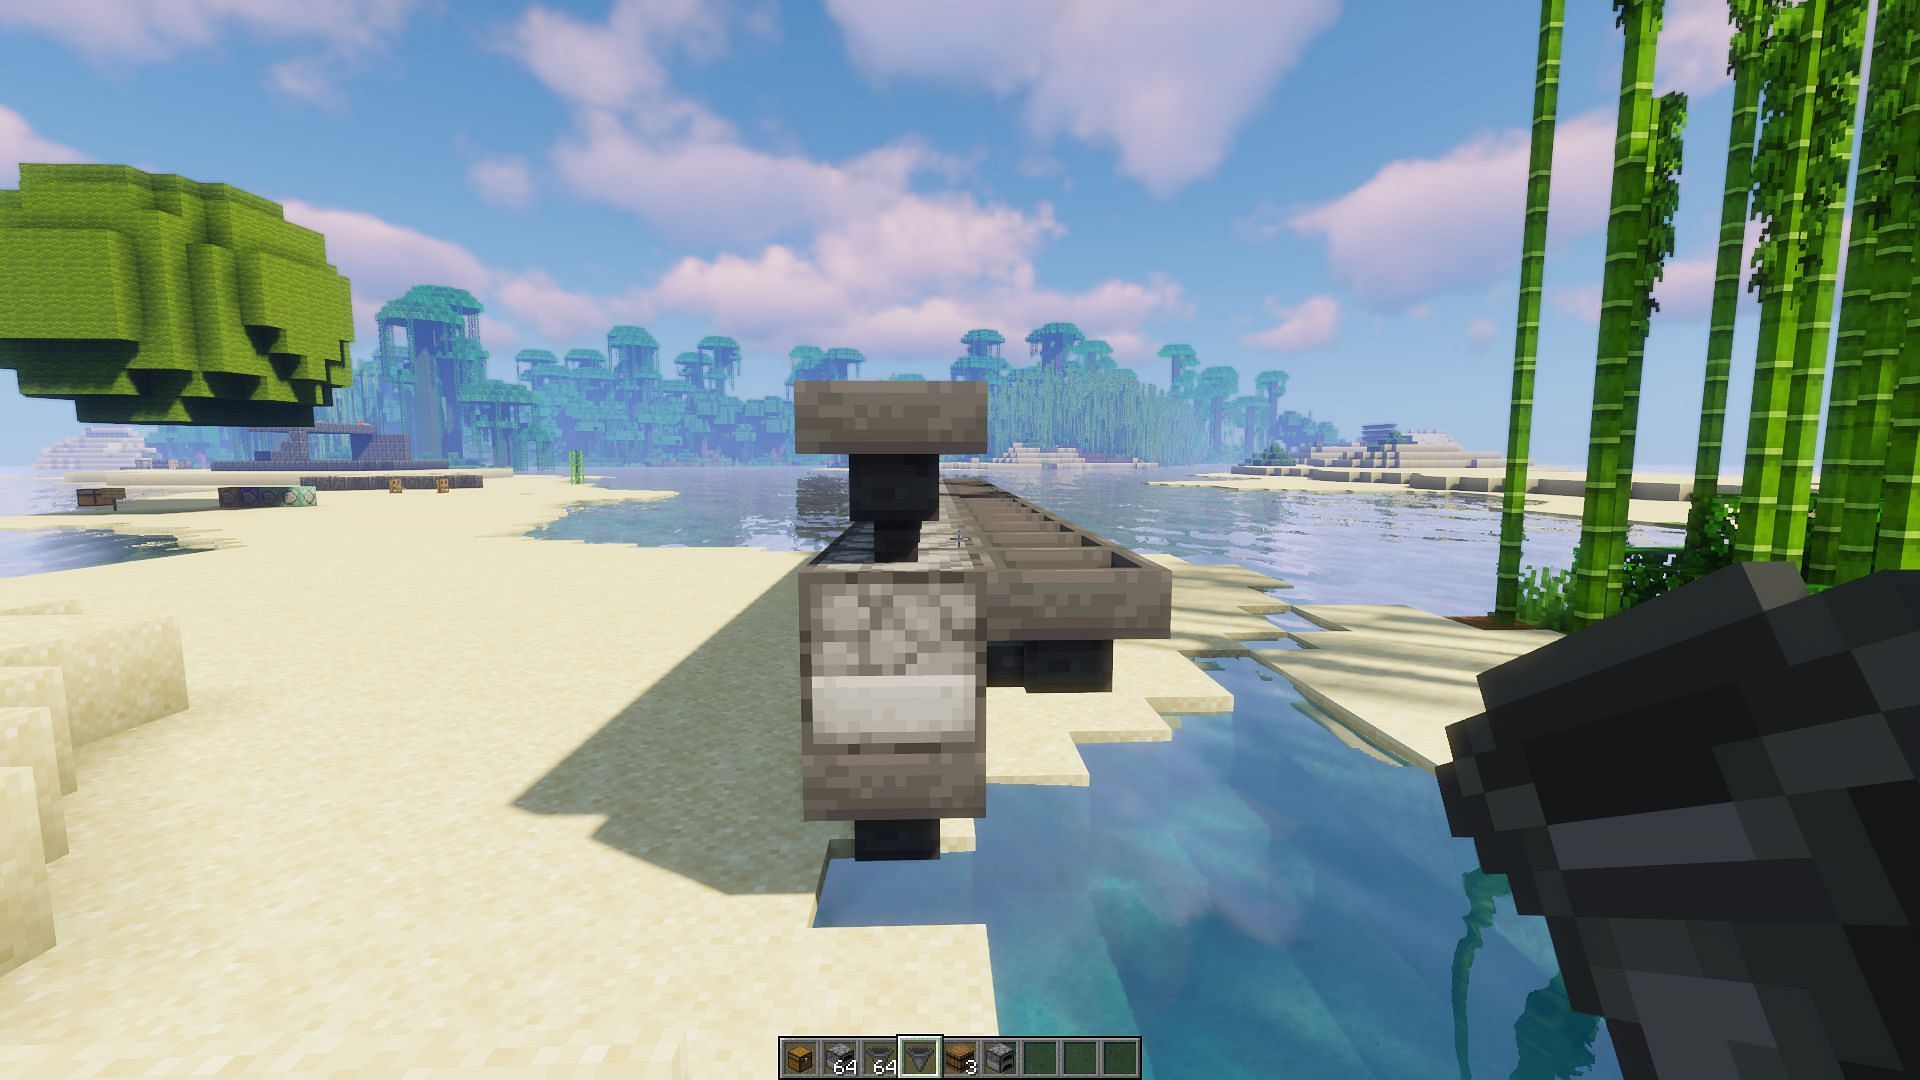 The two rows of input hoppers (Image via Minecraft)